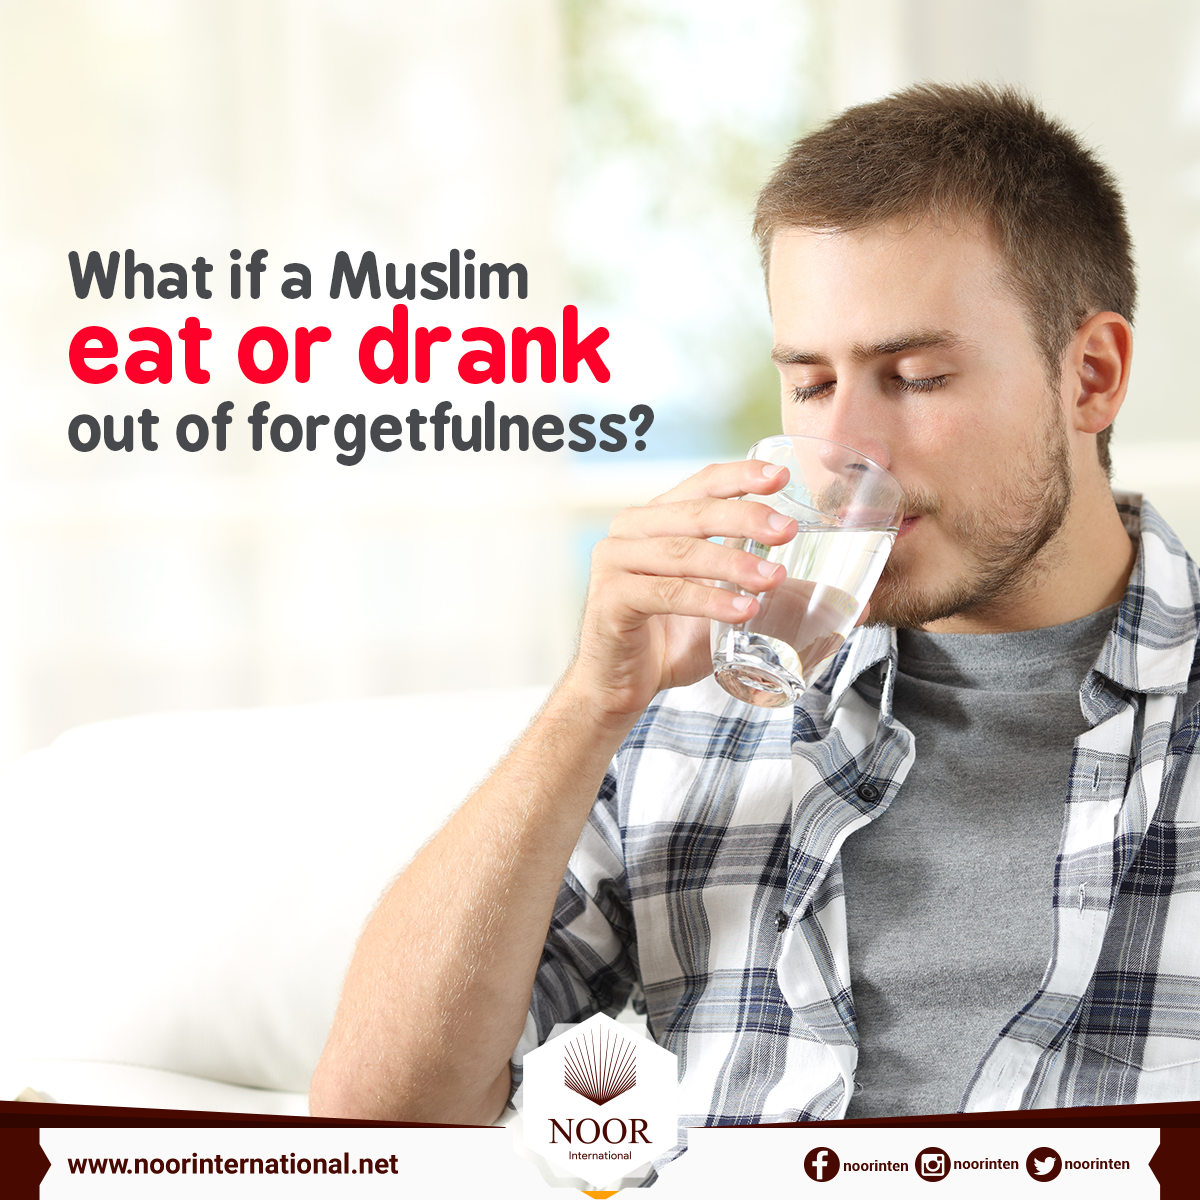 What if a Muslim ate or drank out of forgetfulness?